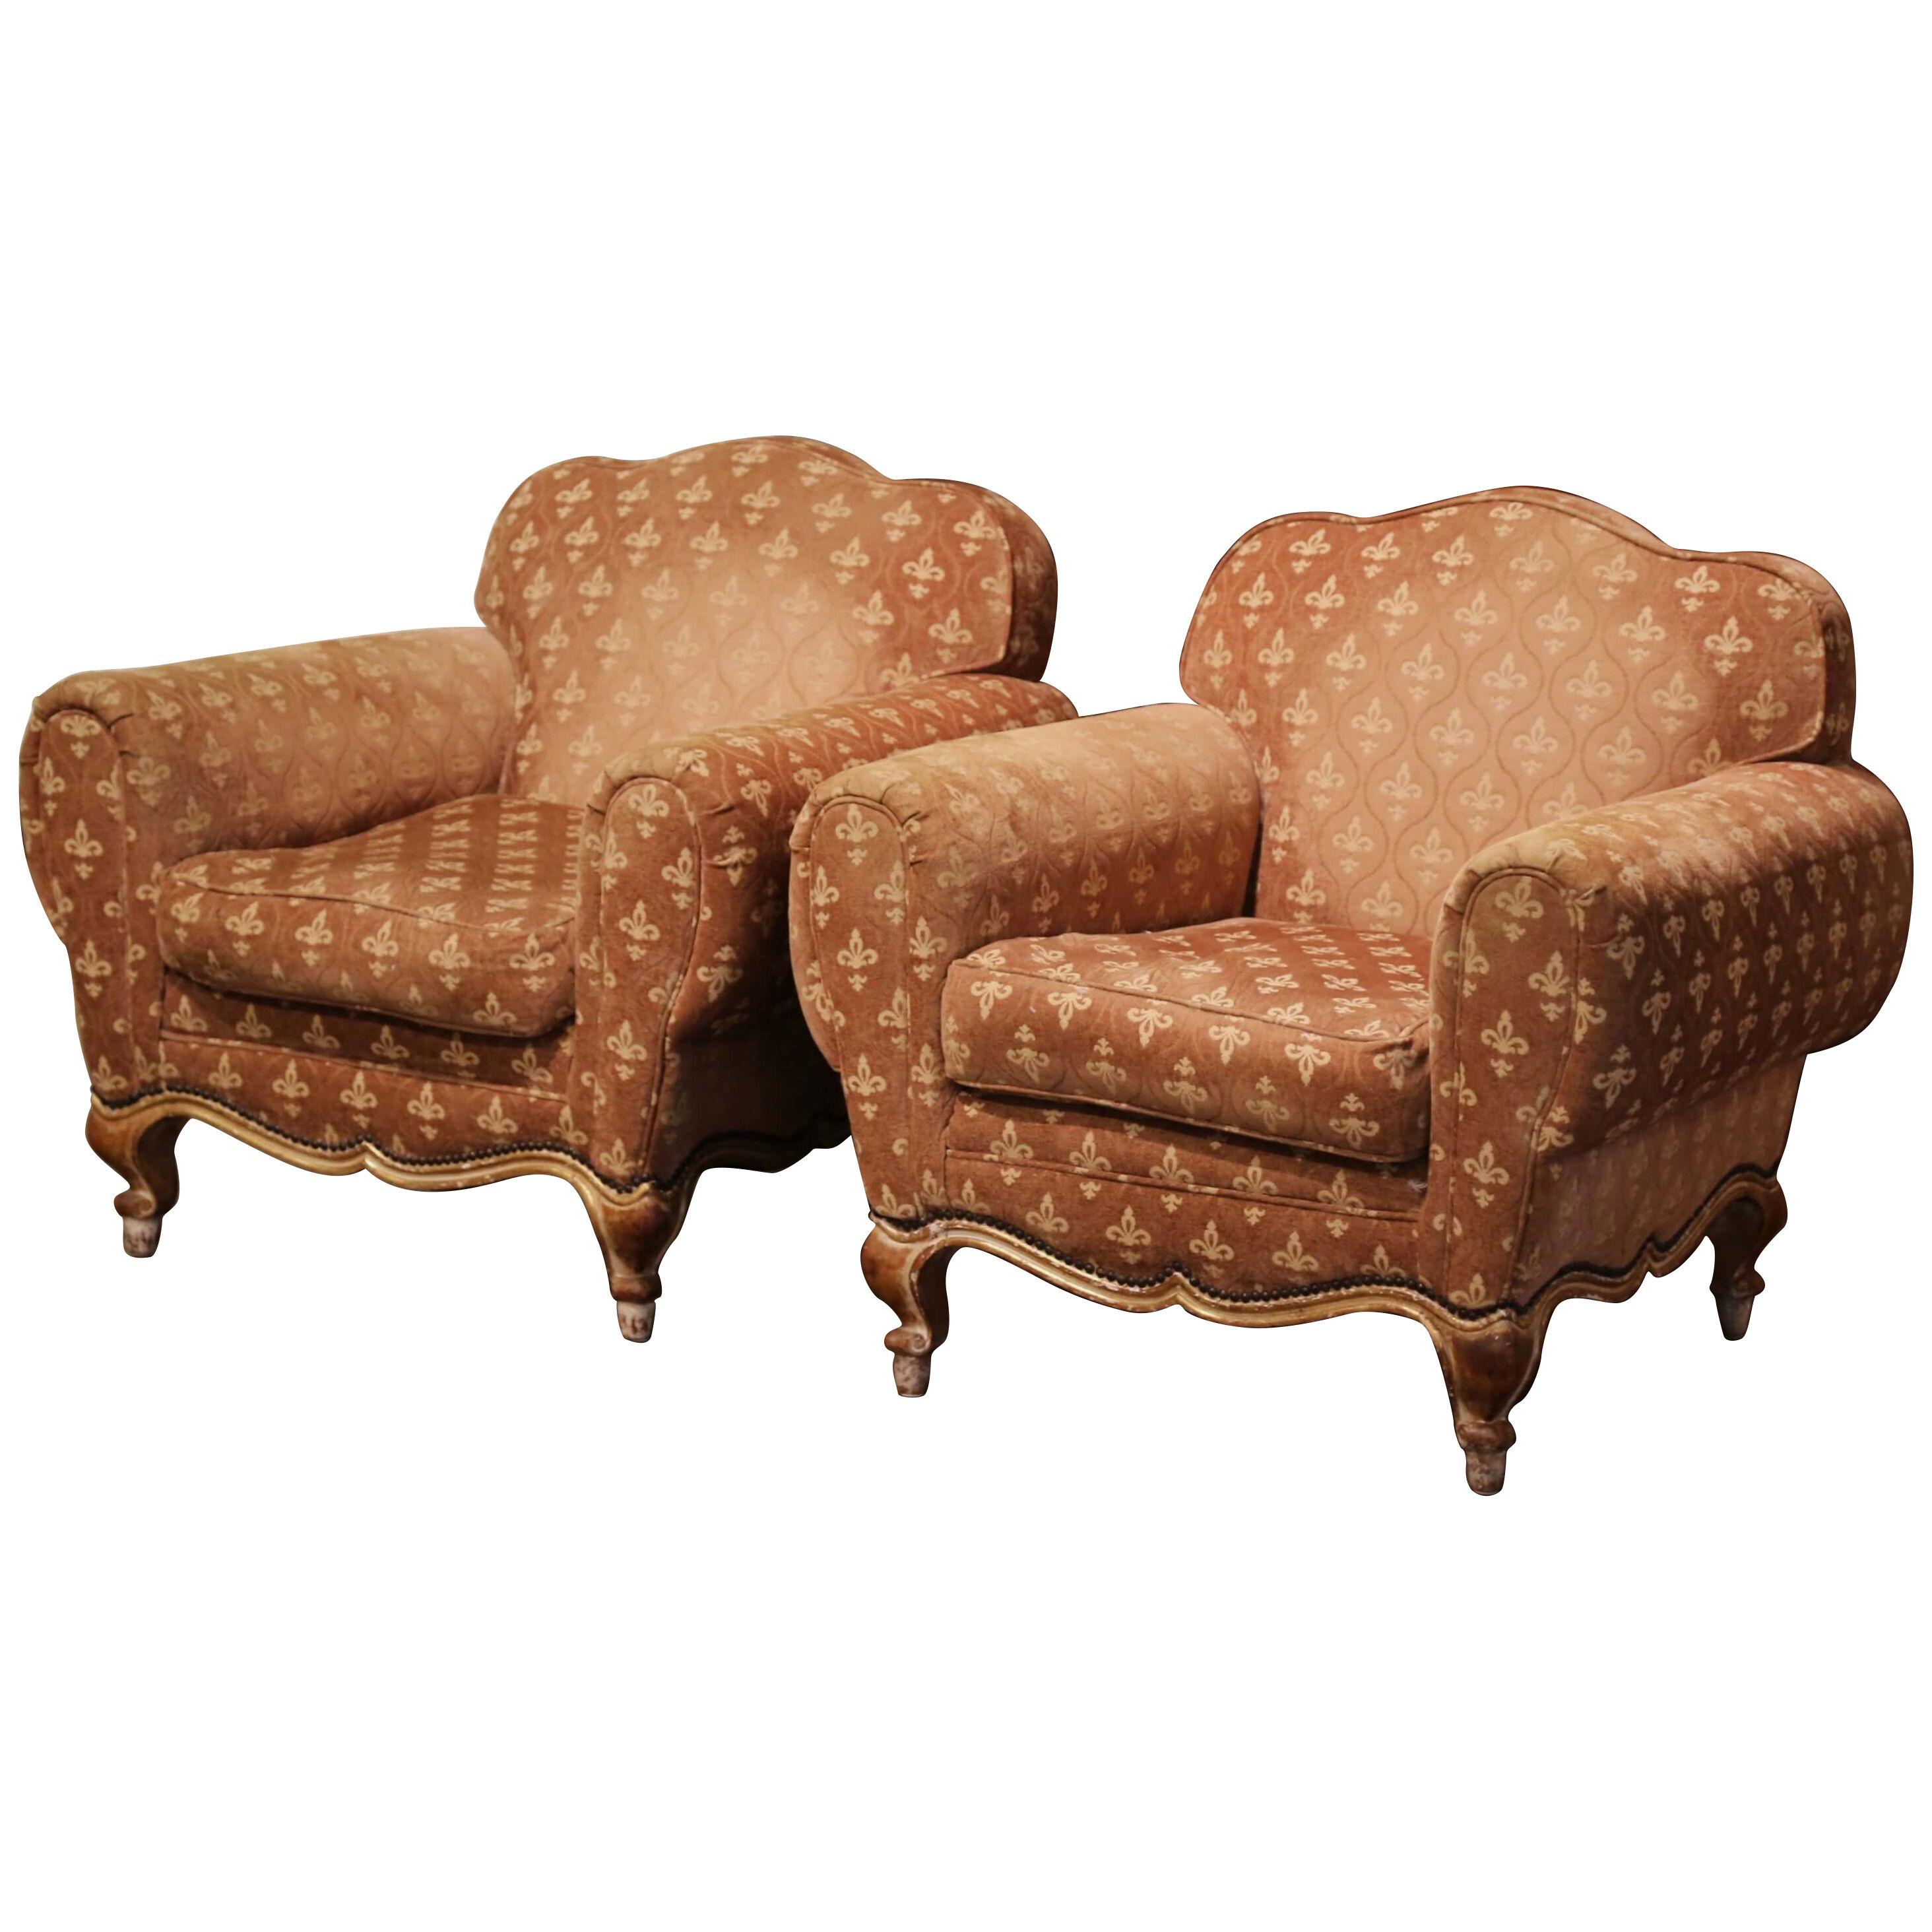 Pair of 19th Century French Carved Club Armchairs with Fleur-de-Lis Fabric